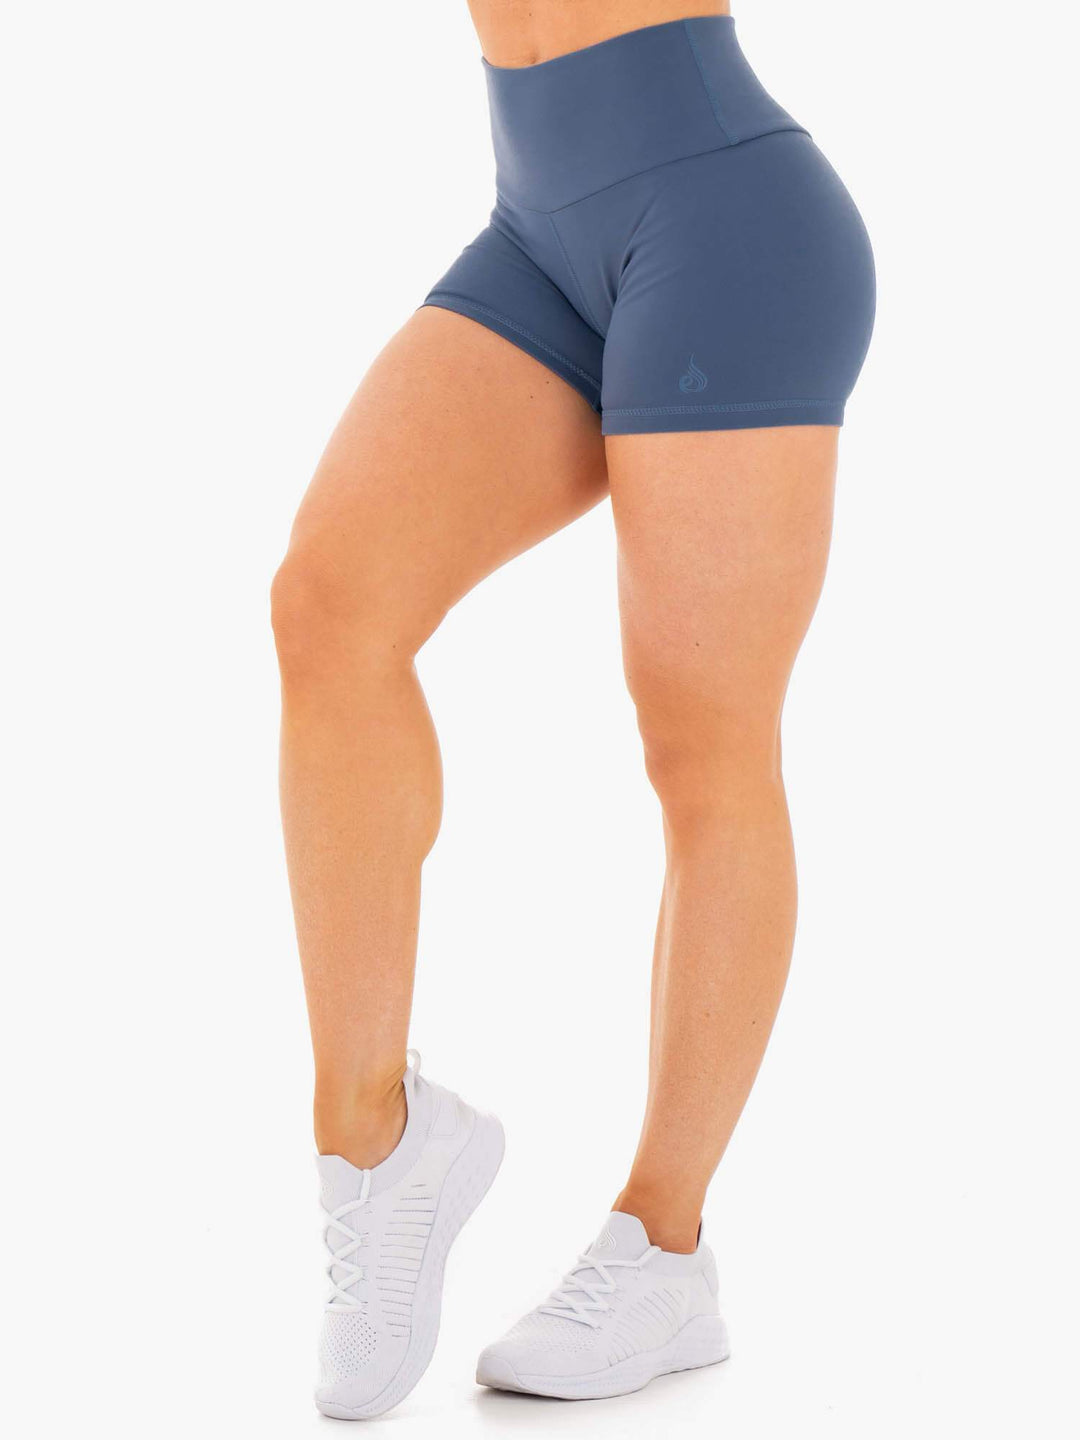 Motion High Waisted Shorts - Steel Blue Clothing Ryderwear 